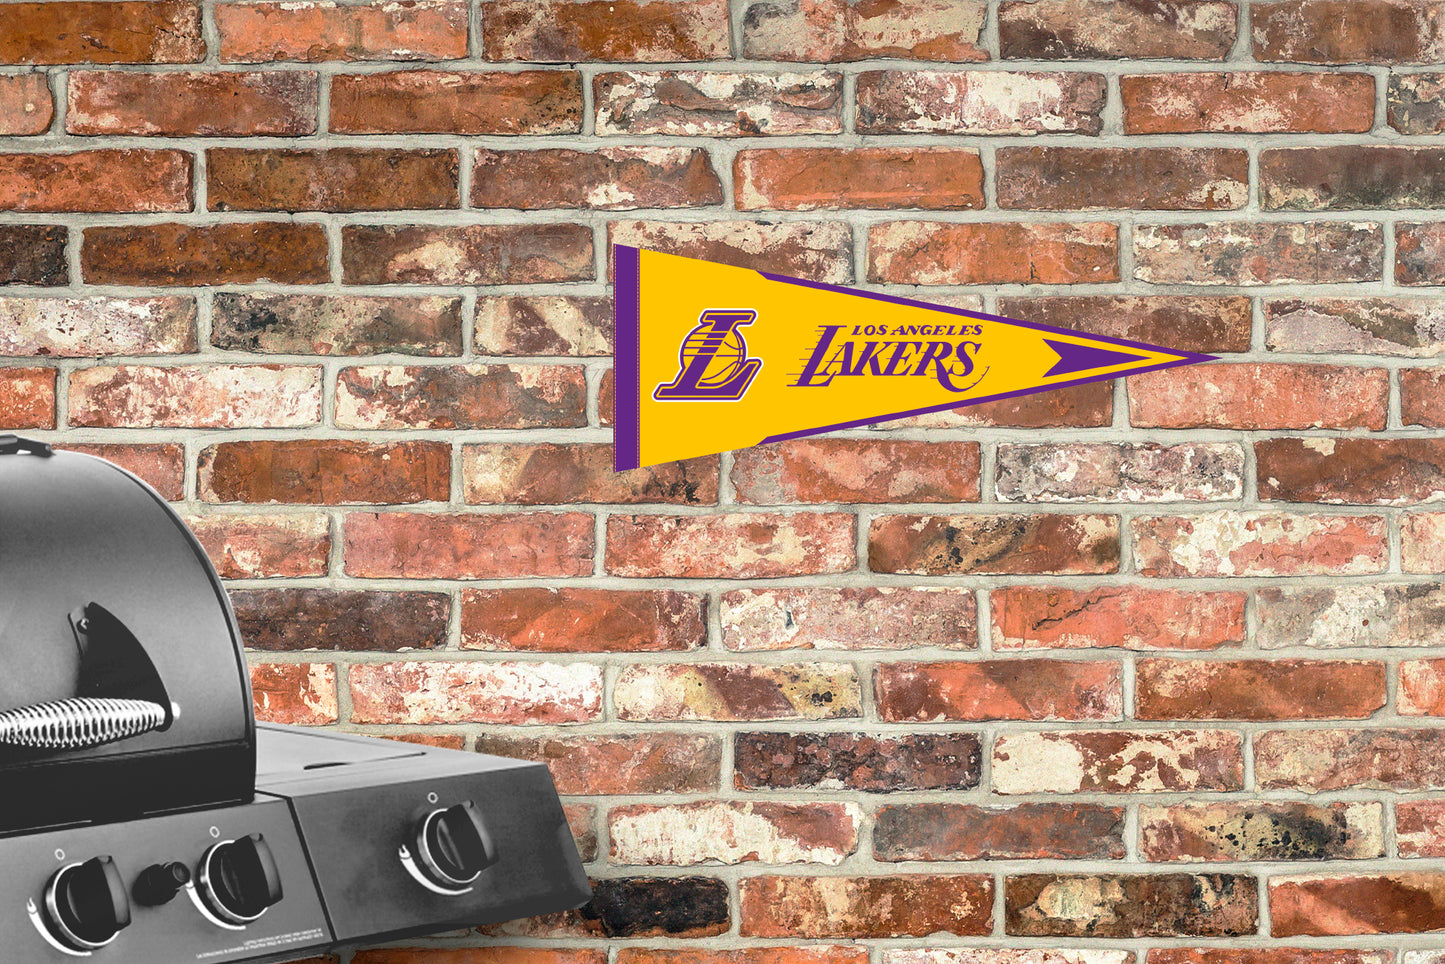 Los Angeles Lakers: Pennant - Officially Licensed NBA Outdoor Graphic